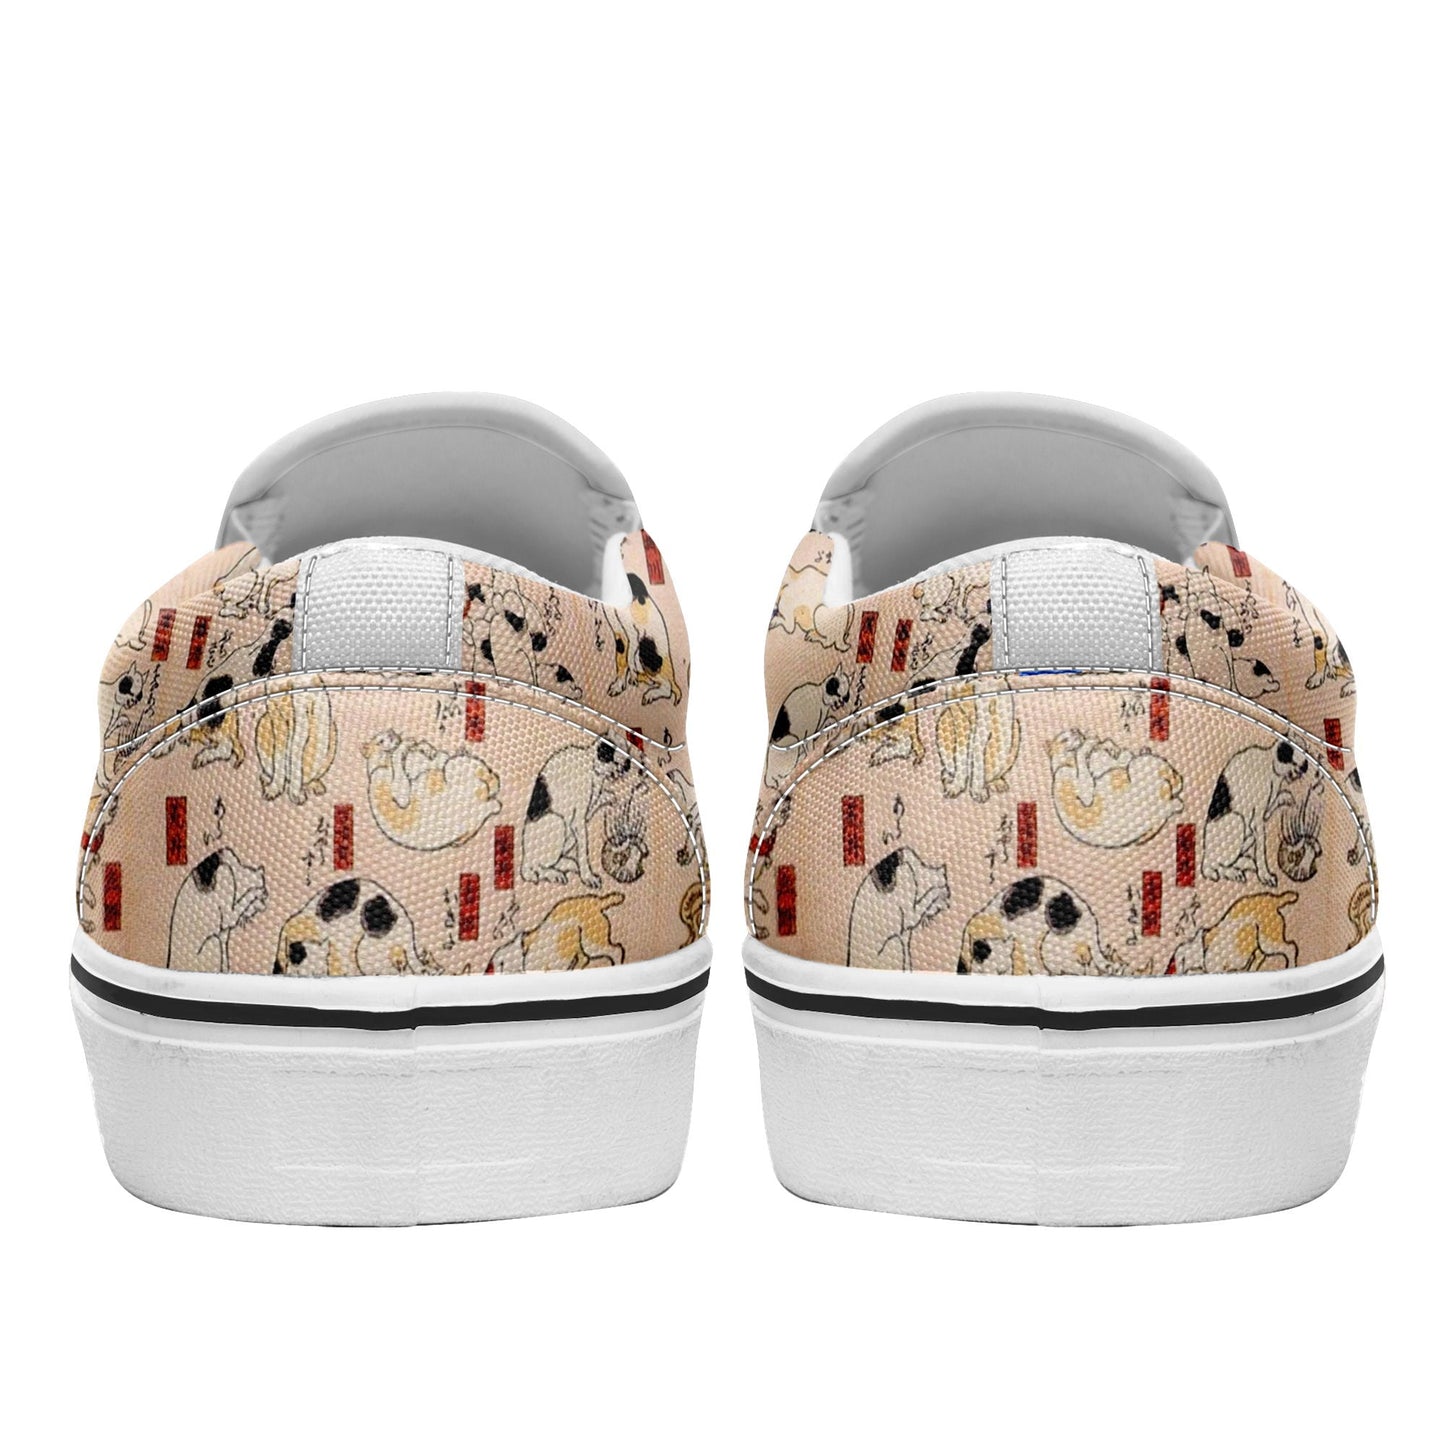 pod ukiyoe sneakers 7216 personalized printed kuniyoshi utagawa's cats suggested as the fifty three stations of the tokaido casual shoes white soles 6